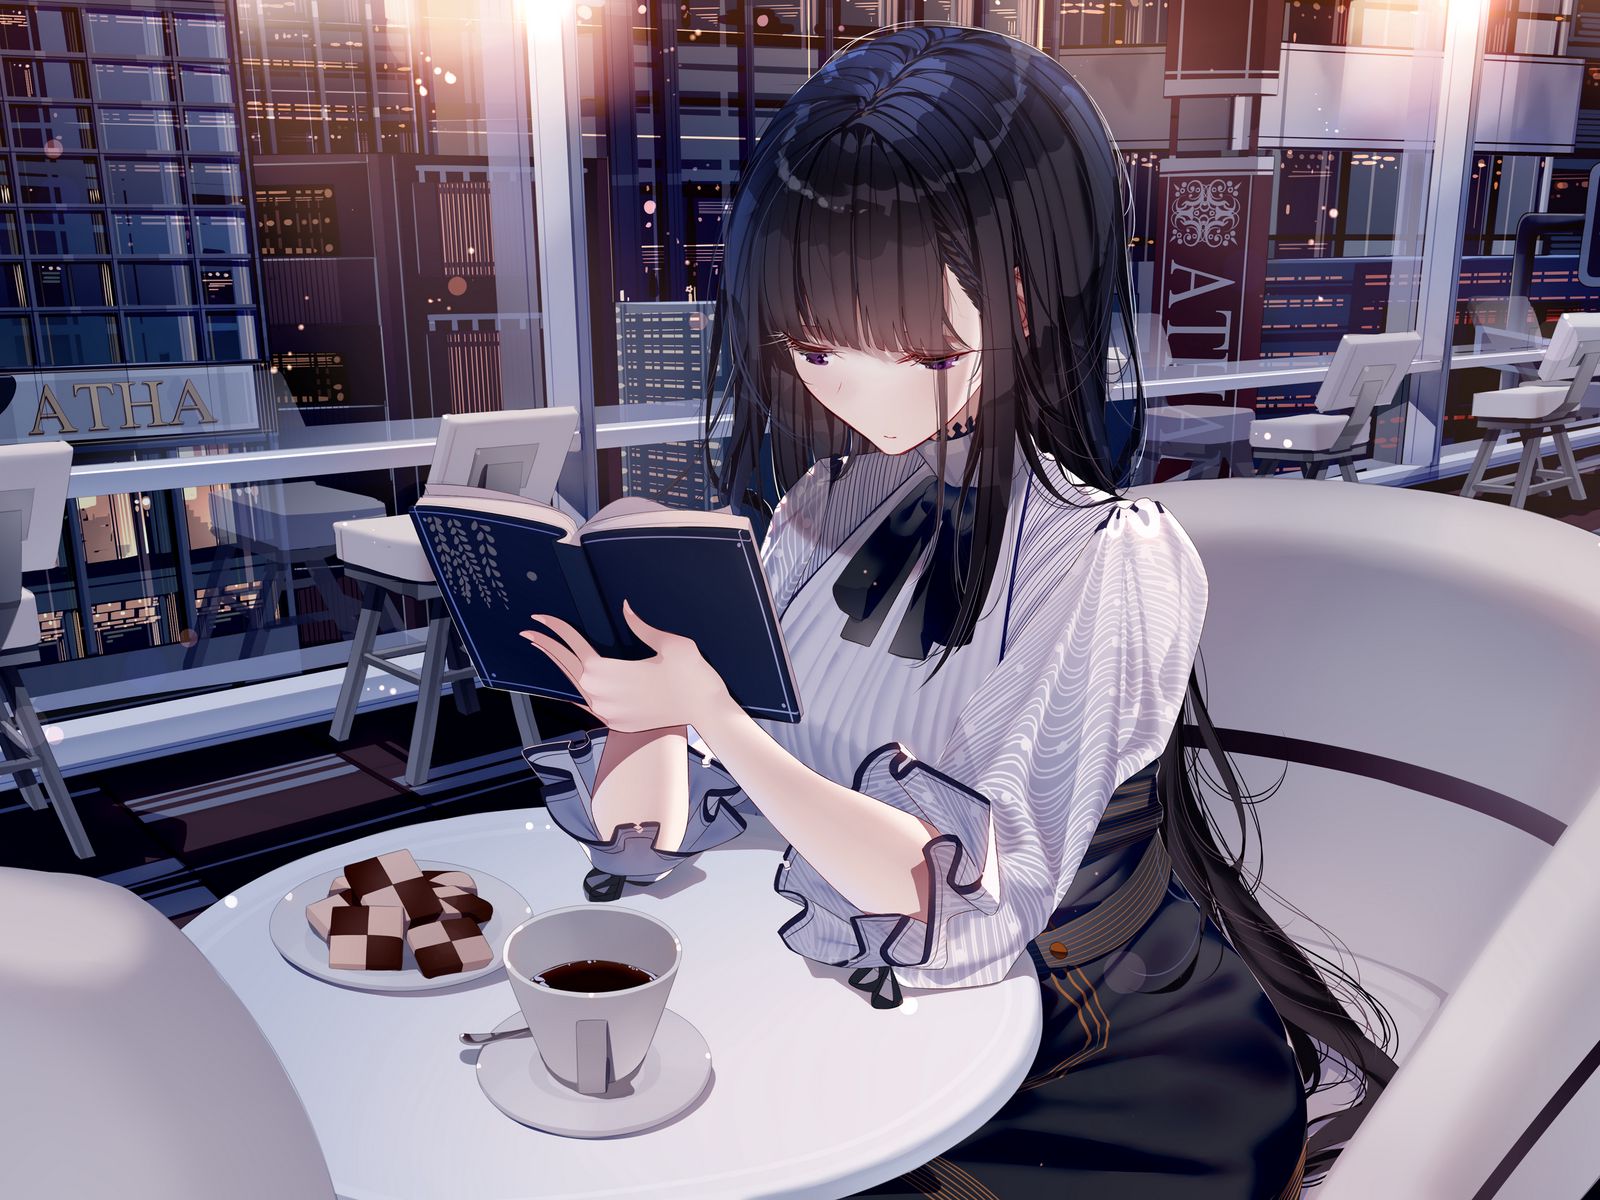 2730 Anime Cafe Images Stock Photos  Vectors  Shutterstock